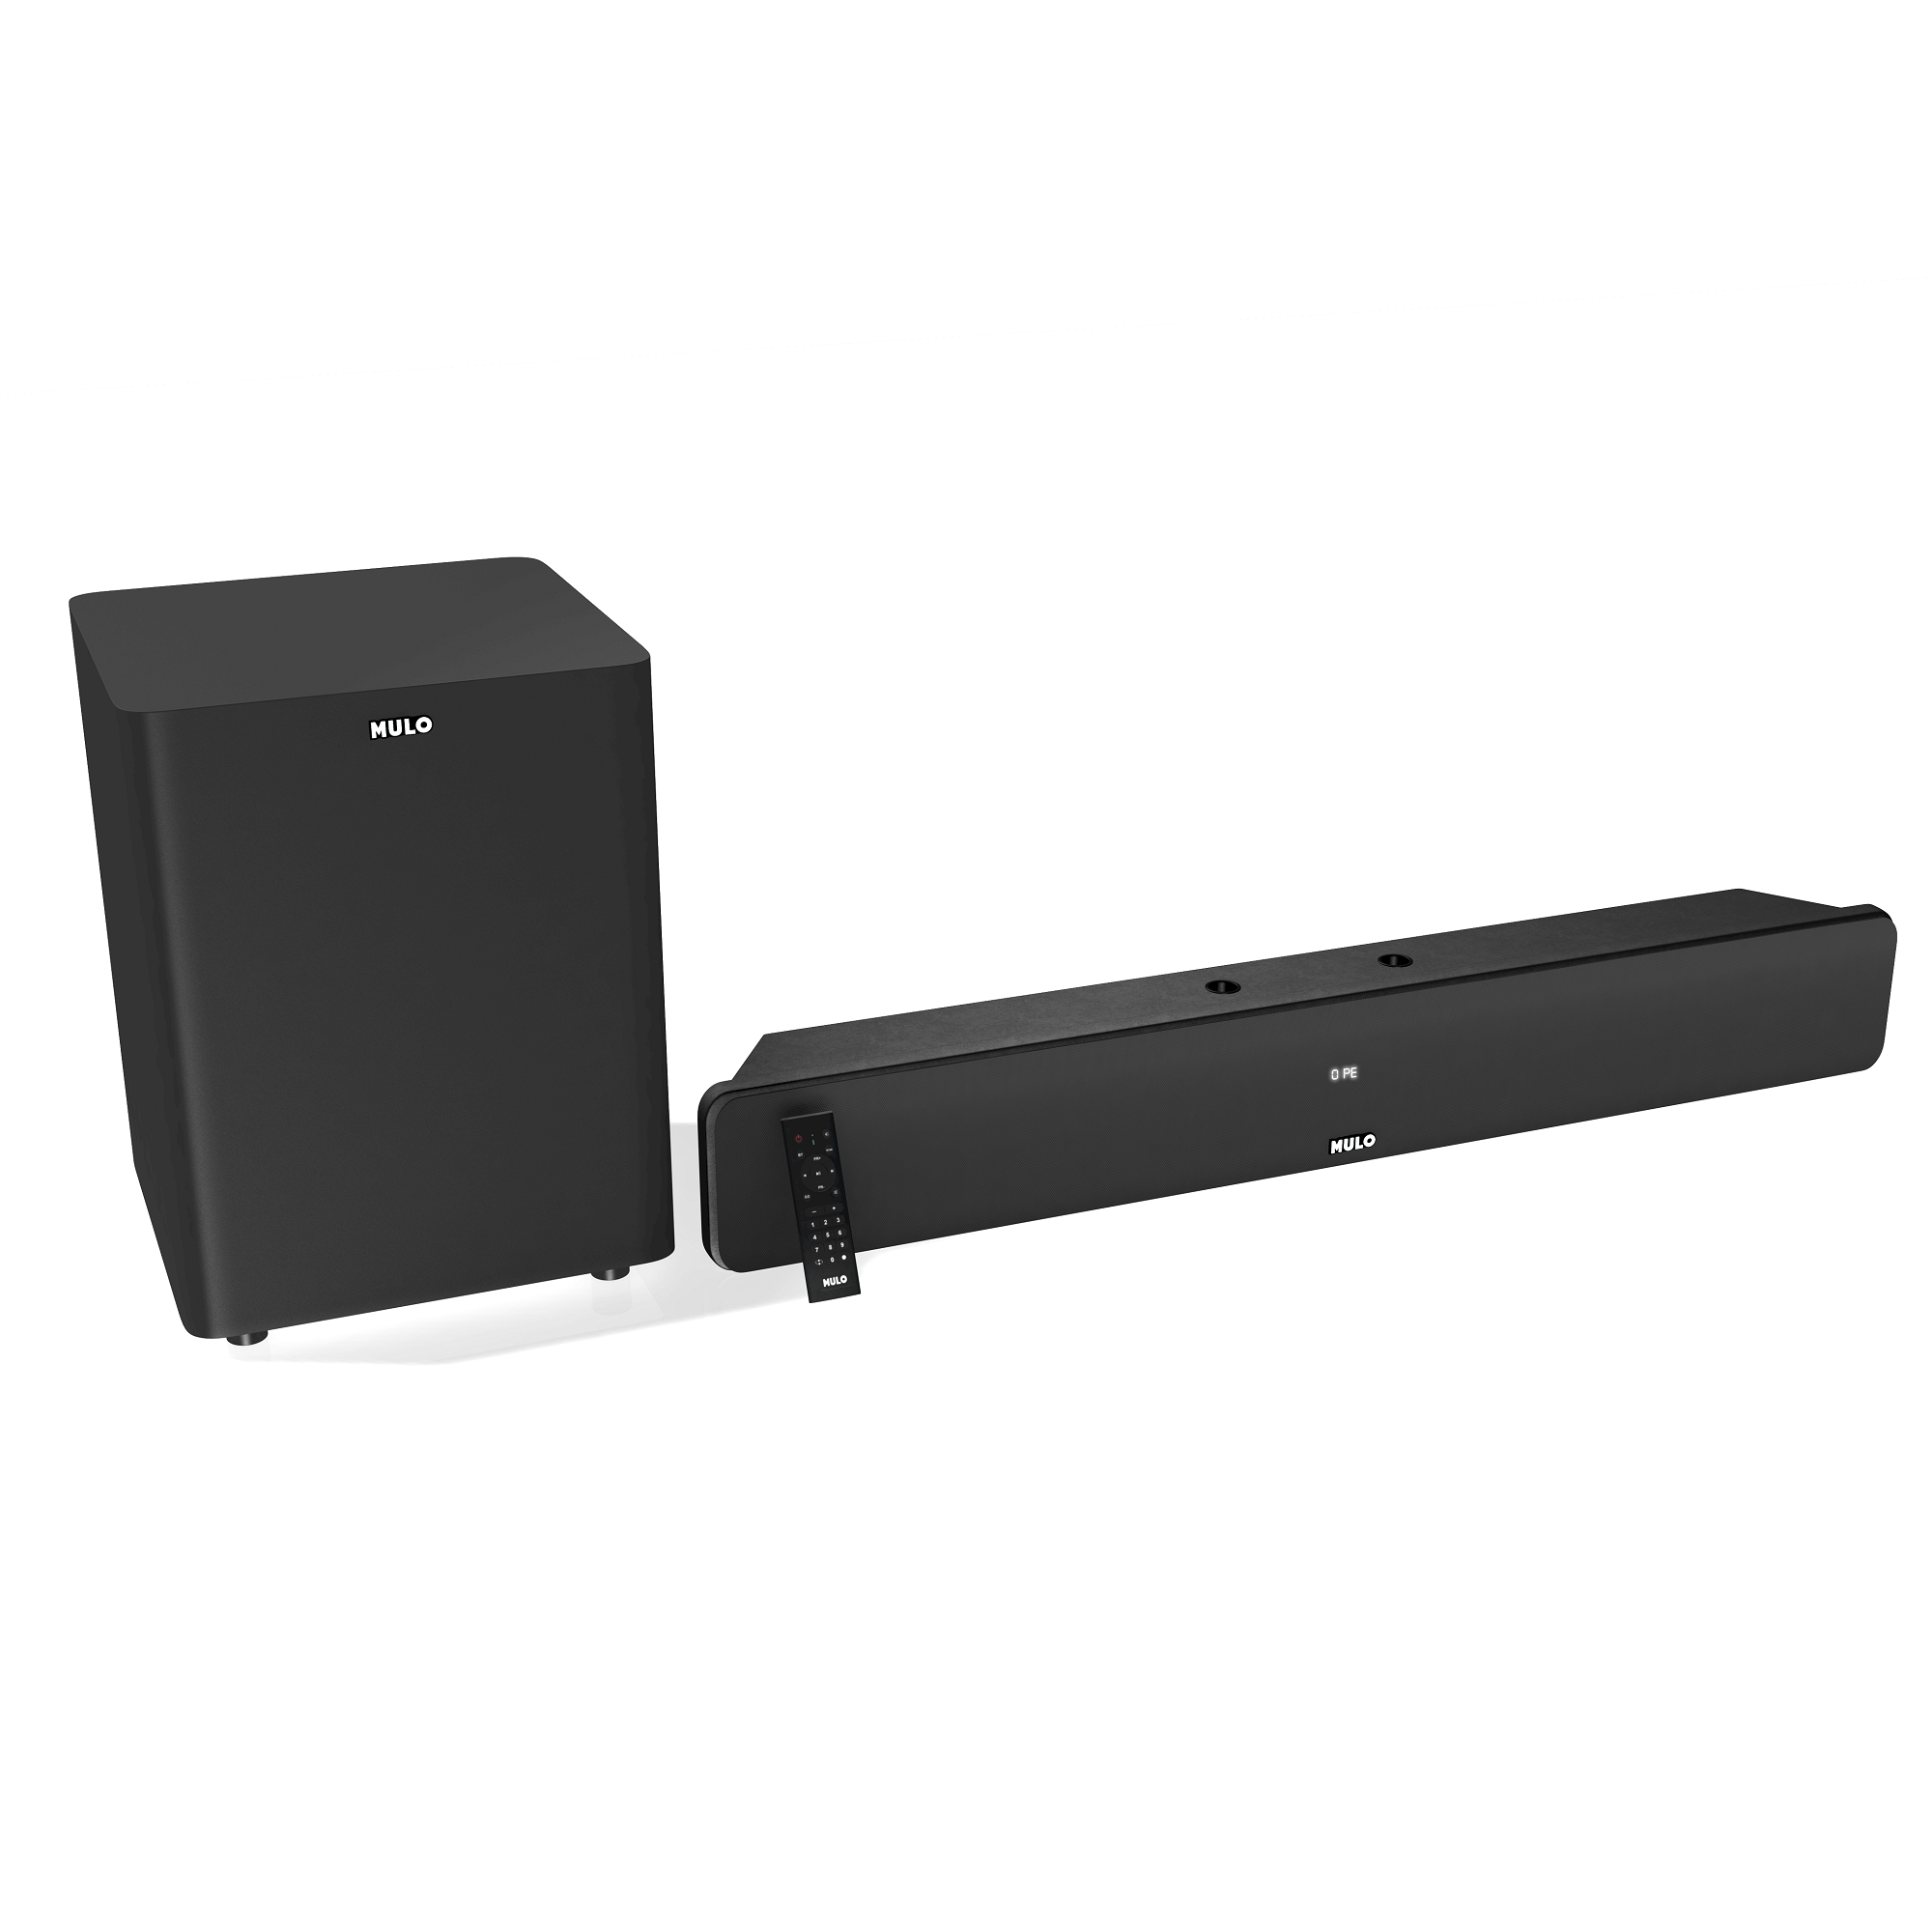 MULO launches Arena 6000 – 60W True RMS 2.1-Channel Soundbar with Subwoofer